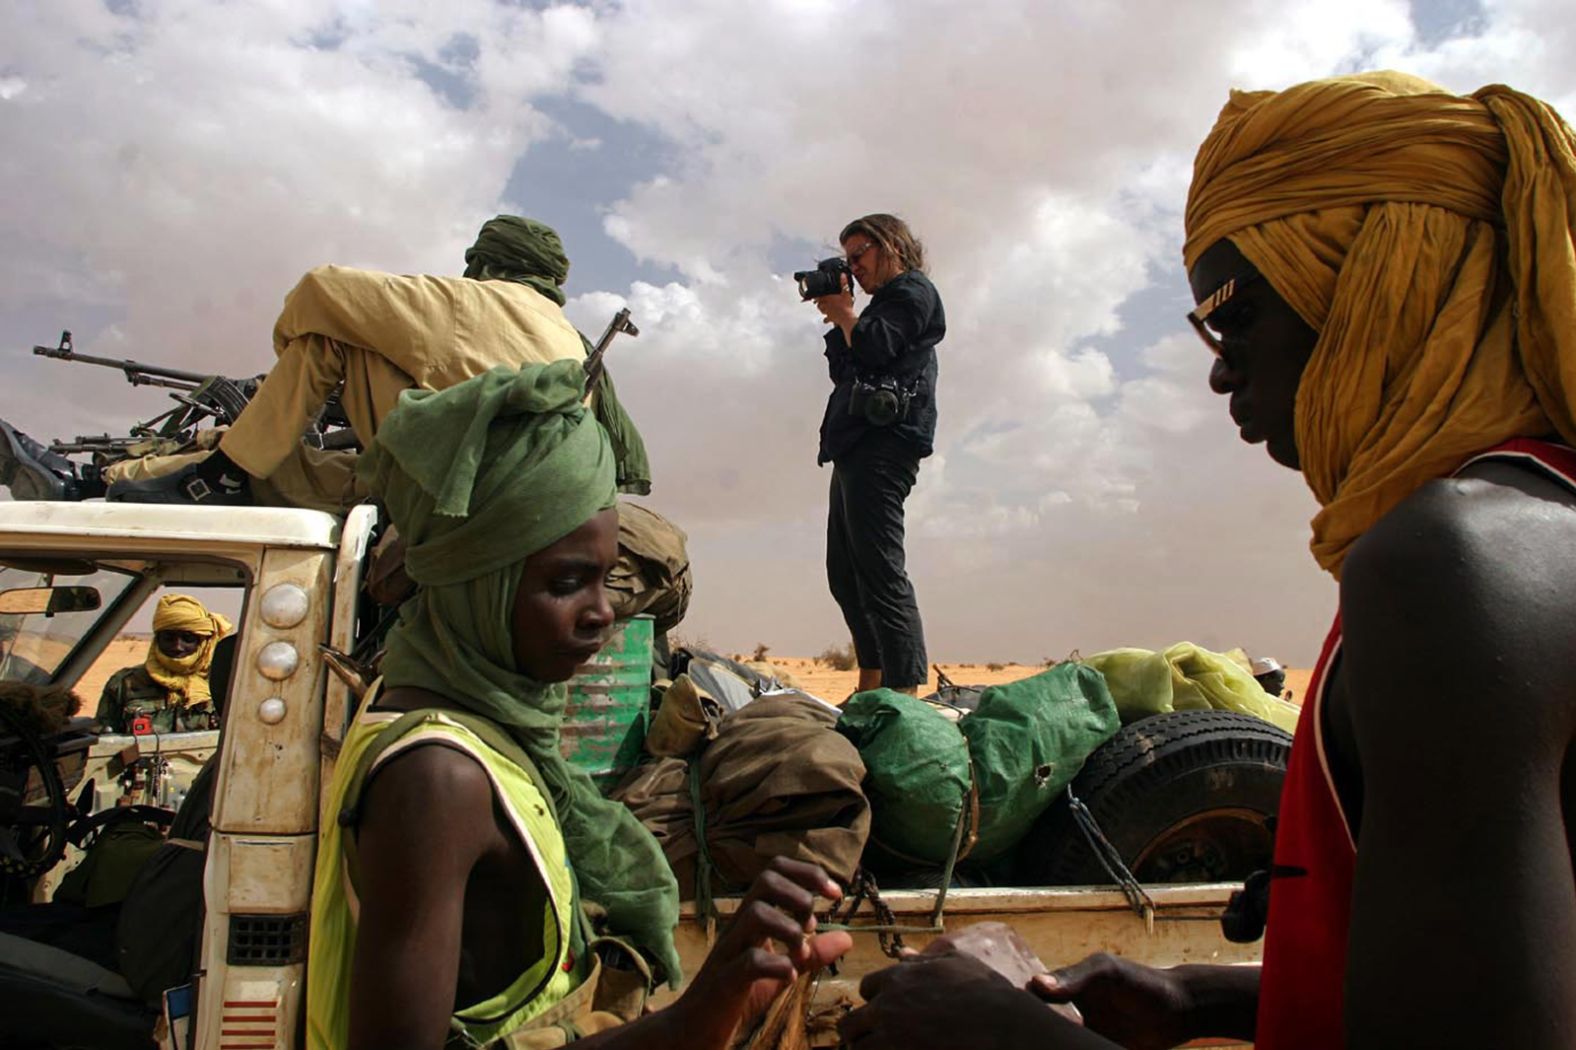 <a href="index.php?page=&url=http%3A%2F%2Fwww.lynseyaddario.com%2F" target="_blank" target="_blank">Lynsey Addario</a> photographs rebels in Sudan's Darfur region in 2004. Addario has covered conflicts and humanitarian crises in many countries, including Afghanistan, Iraq, Libya, Syria and Somalia. Her work in Afghanistan contributed to a Pulitzer Prize that The New York Times won in 2009 for international reporting. Addario has been kidnapped twice while working in war zones. Her memoir, "It's What I Do," was a New York Times best-seller. 